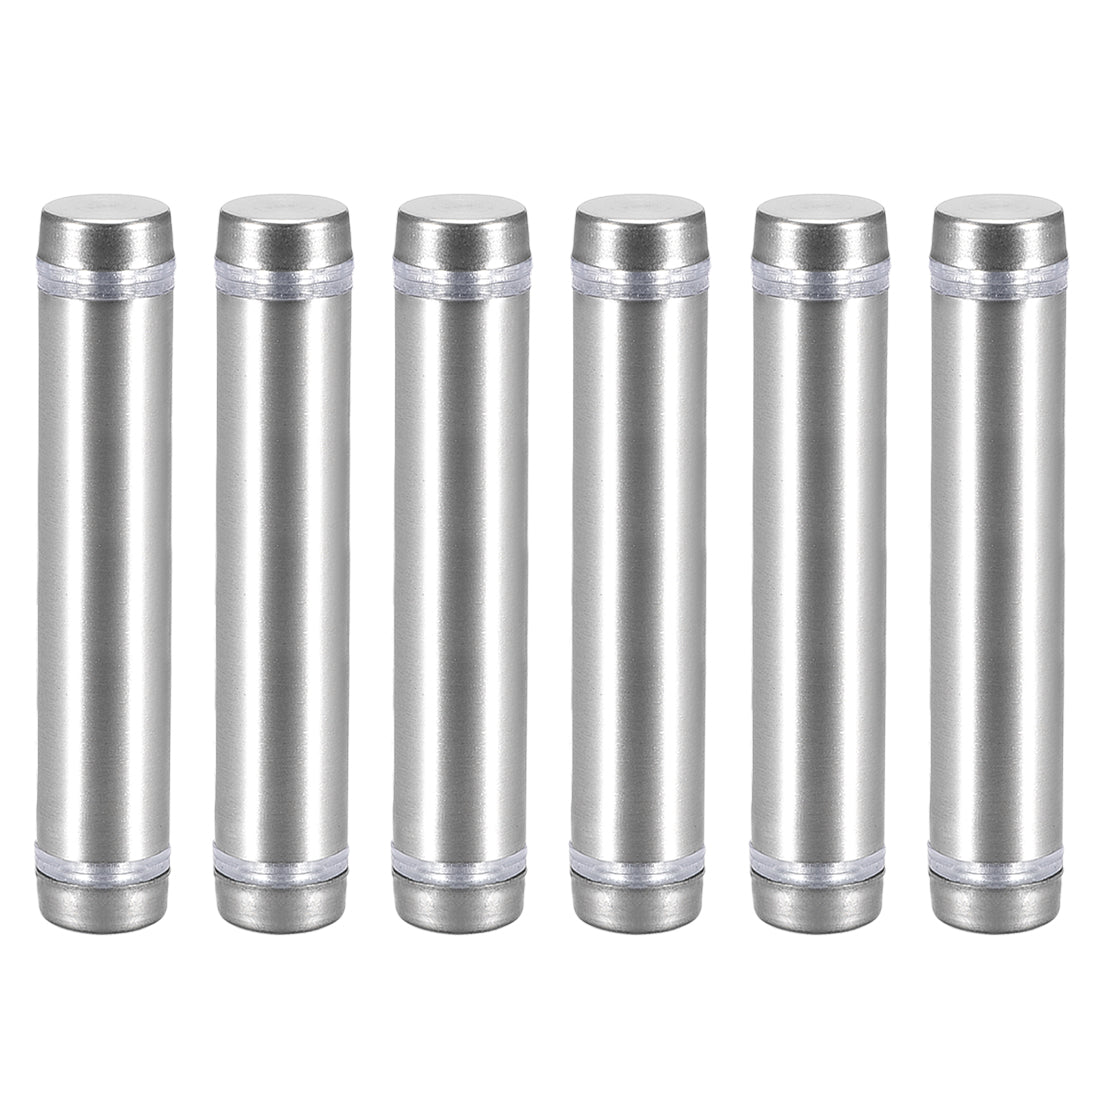 uxcell Uxcell Glass Standoff Double Head Stainless Steel Standoff Holder 12mm x 64mm 6 Pcs